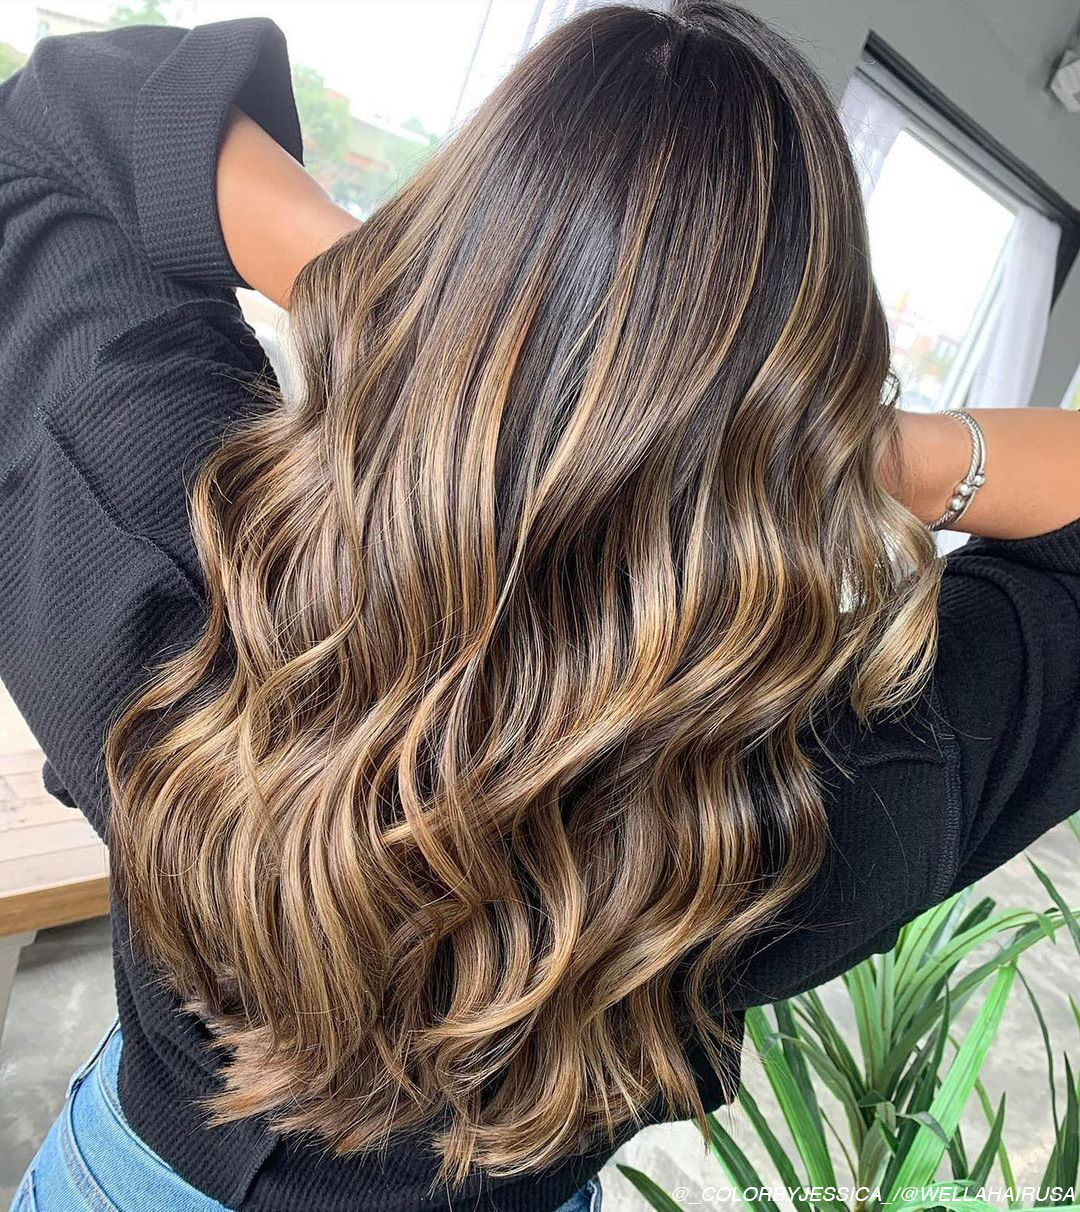 The Top Reasons To Ask For Lowlights - Bangstyle - House of Hair Inspiration